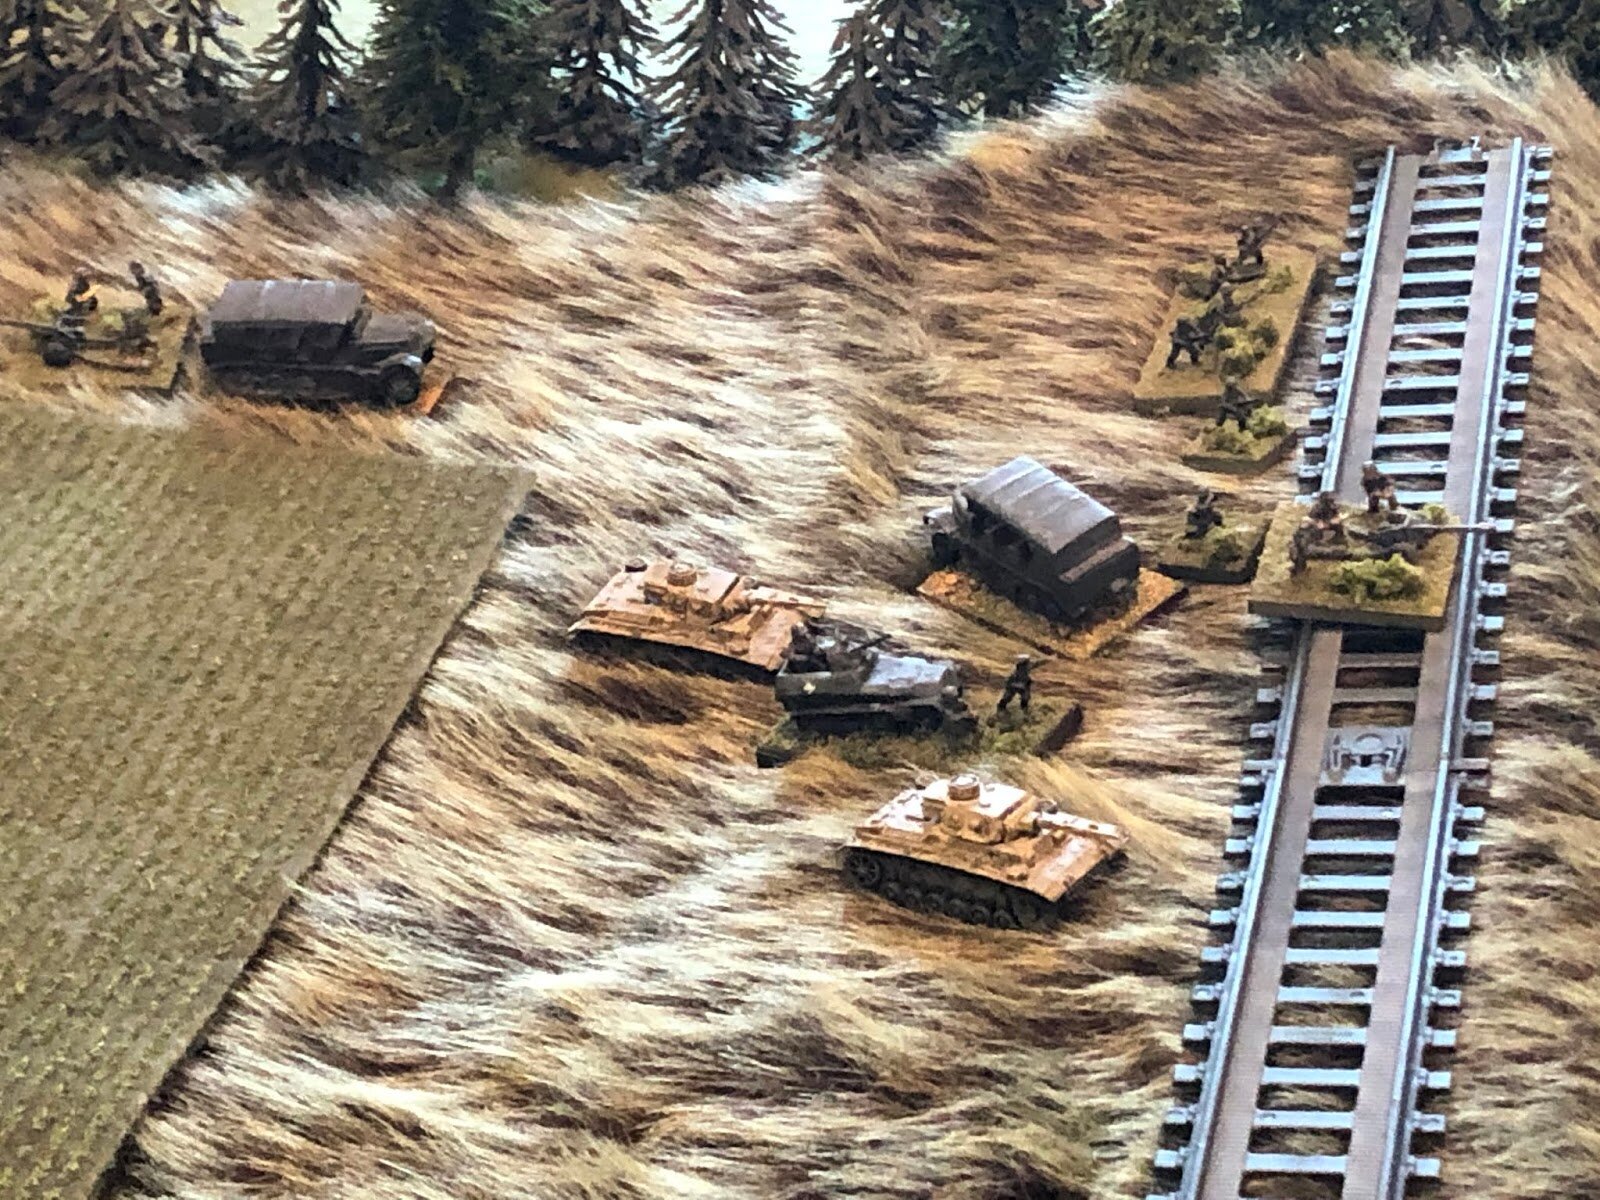  On the German left, the German CO gets involved, moving the ATG Platoon up to the railway embankment, even getting Gun #1 into position and unlimbered (right, with Gun #2 still on the move at top left). 